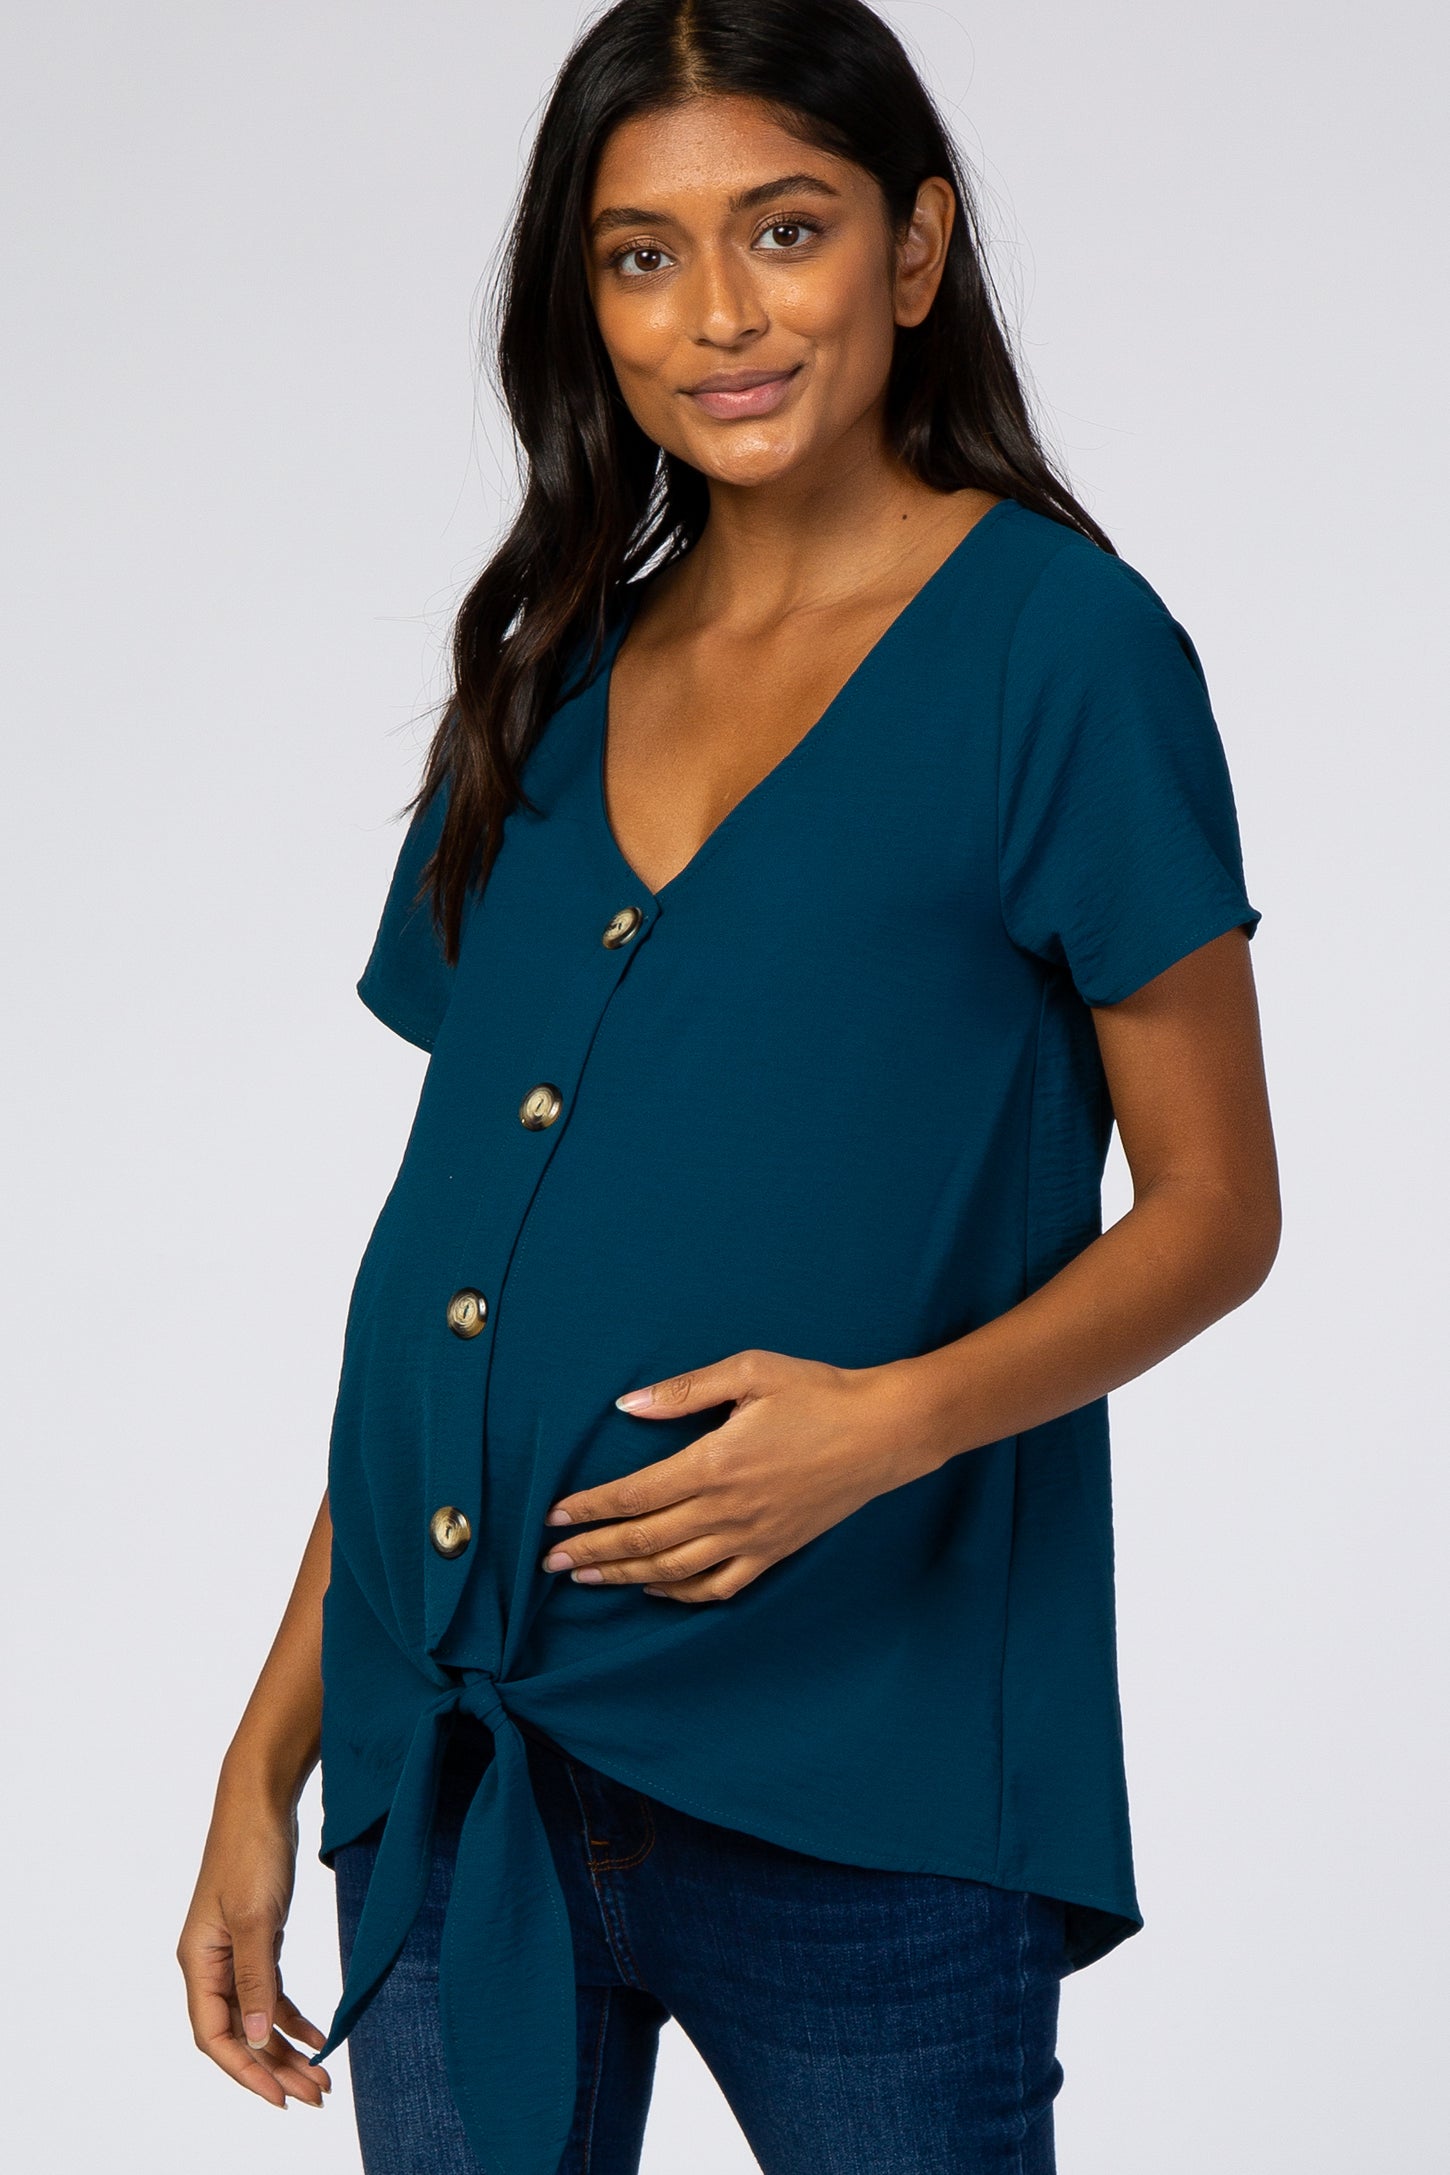 Teal Button Tie Front Maternity Top